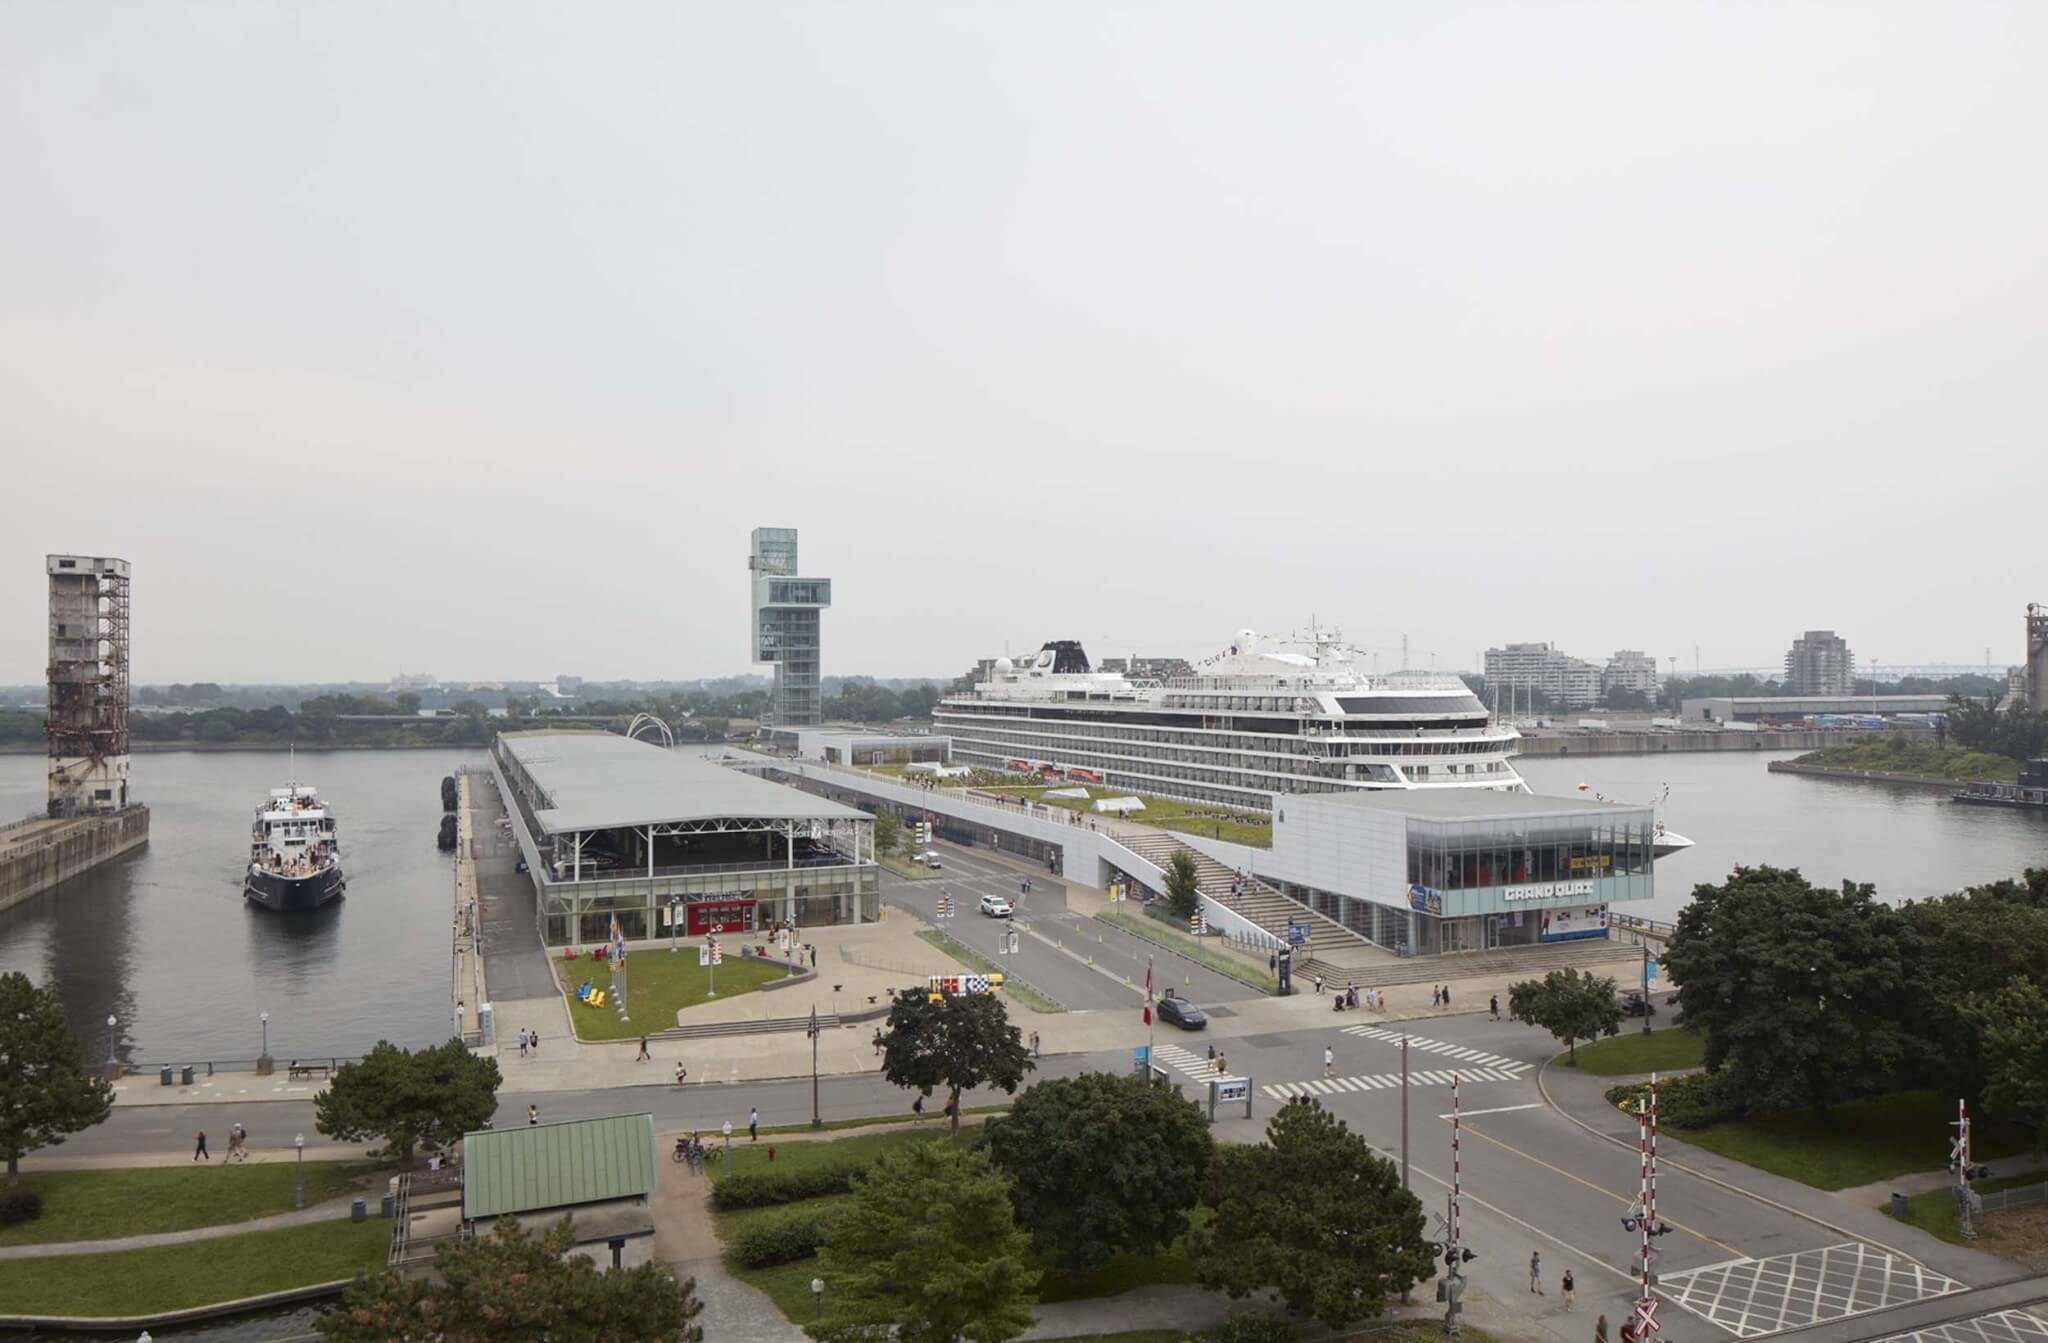 cruise terminals with Port of Montreal Tower in center